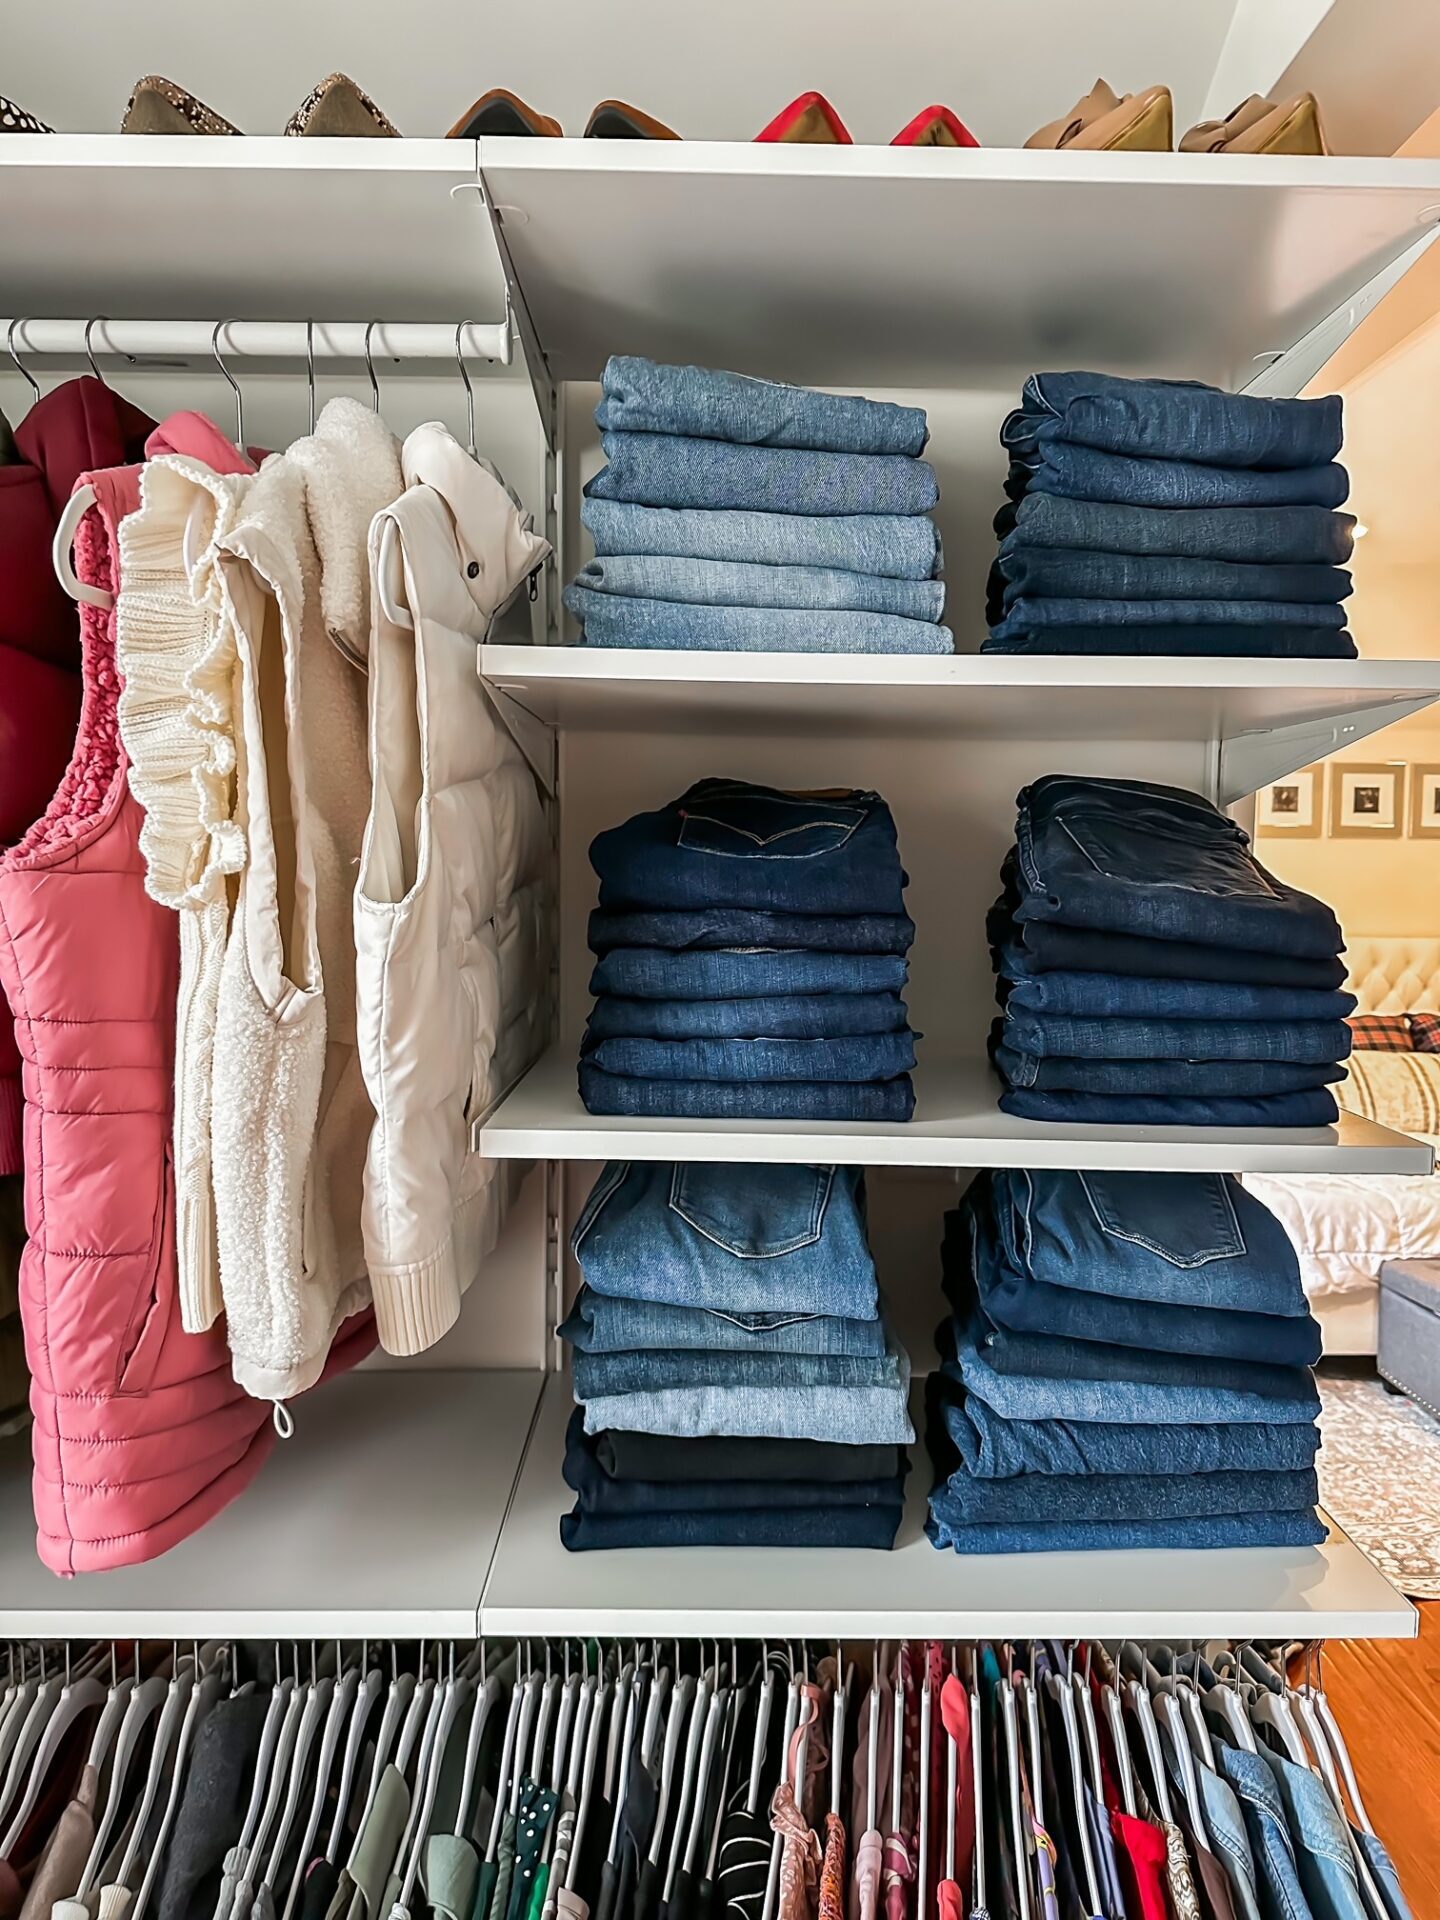 MASTER CLOSET MAKEOVER - An incredible before-and-after closet transformation and master closet organization project with luxury Philadelphia professional organizers, The Organized Home Co.